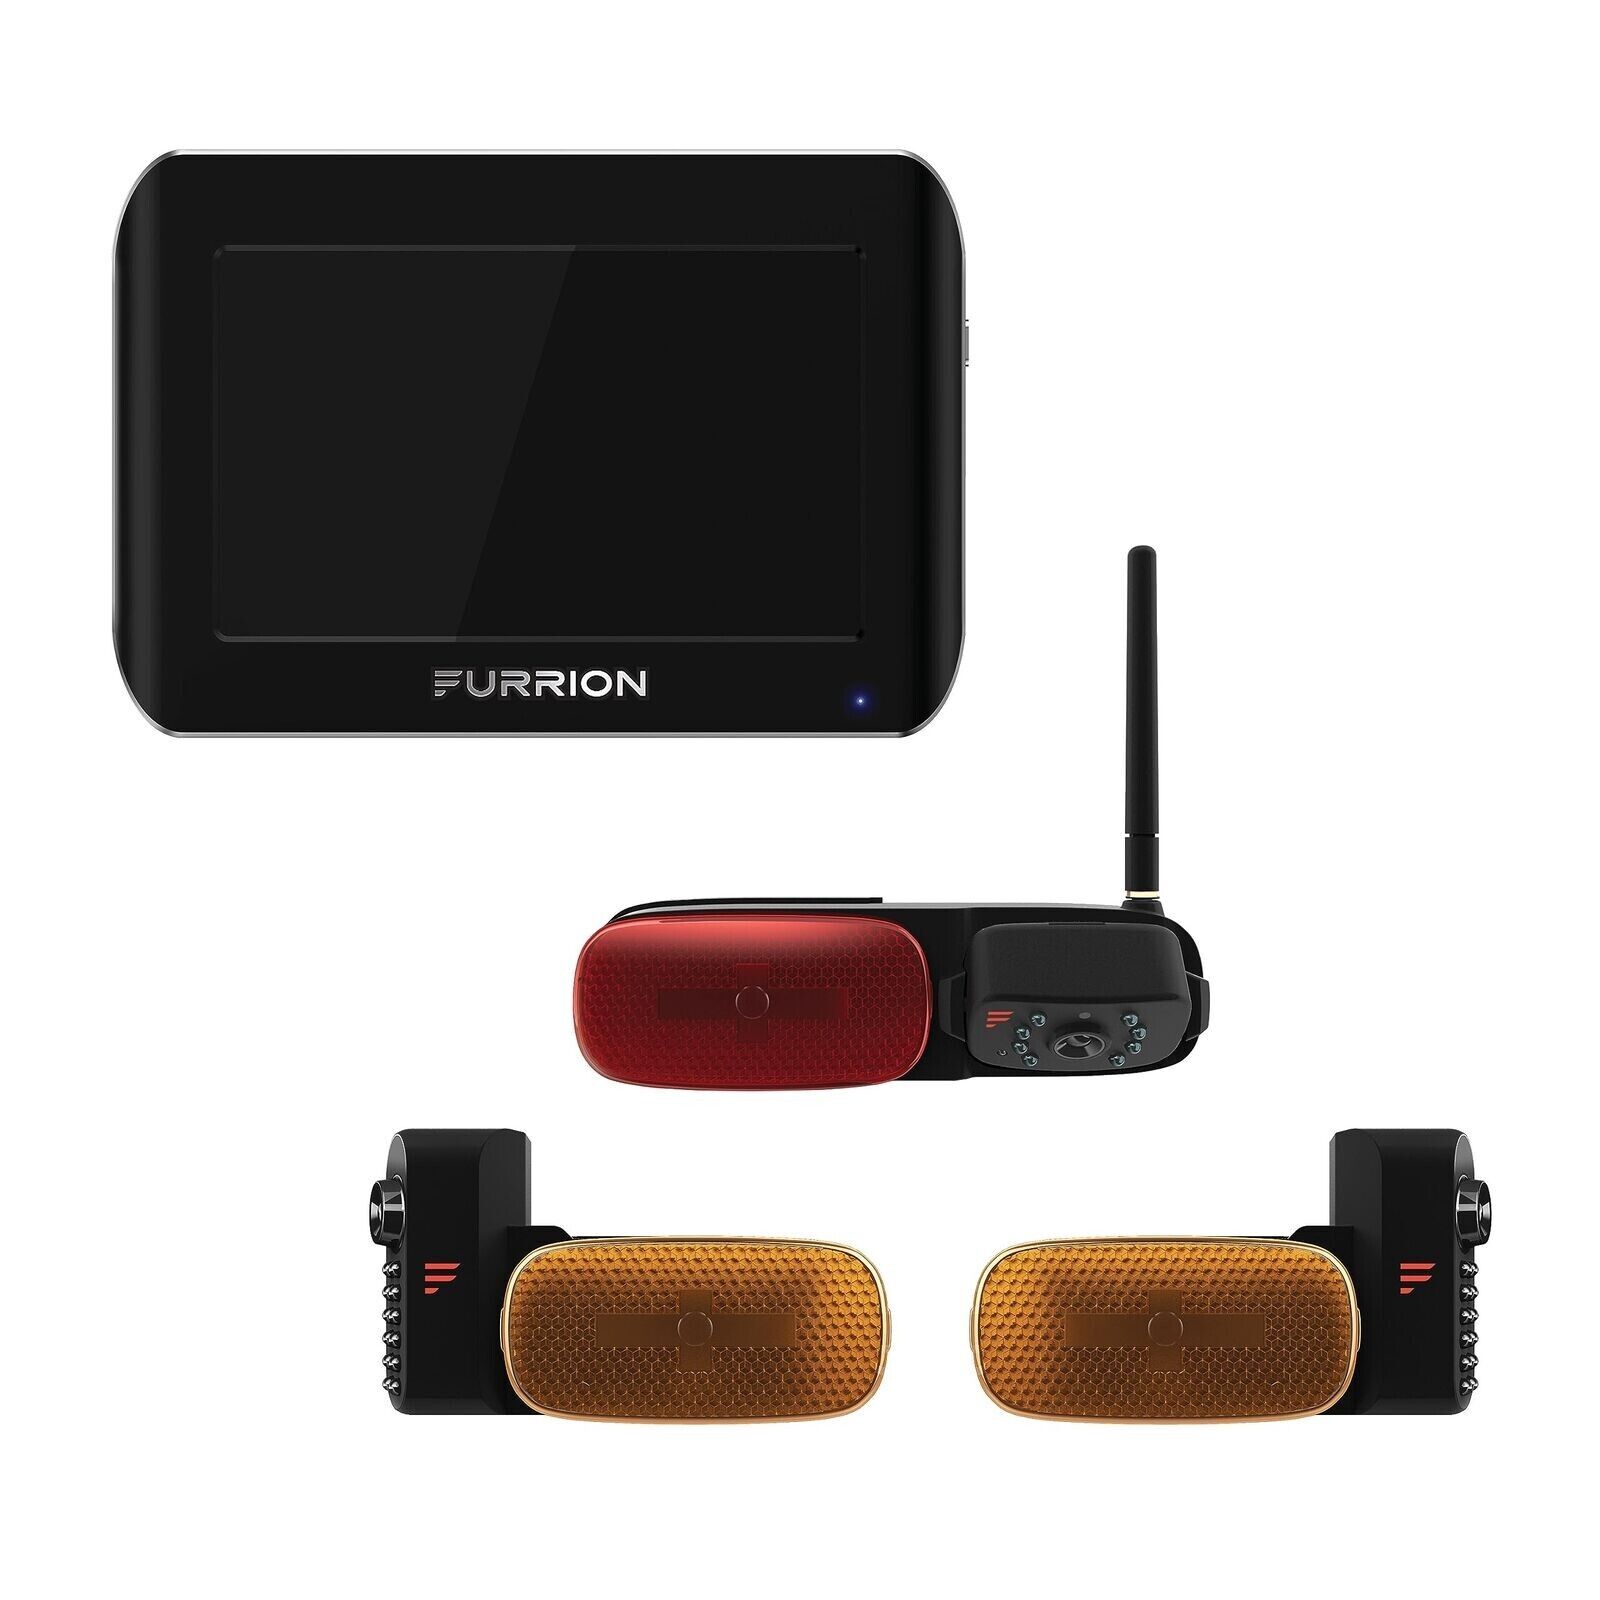 Furrion Vision S Wireless RV Backup Complete Camera System with 7-Inch Monitor